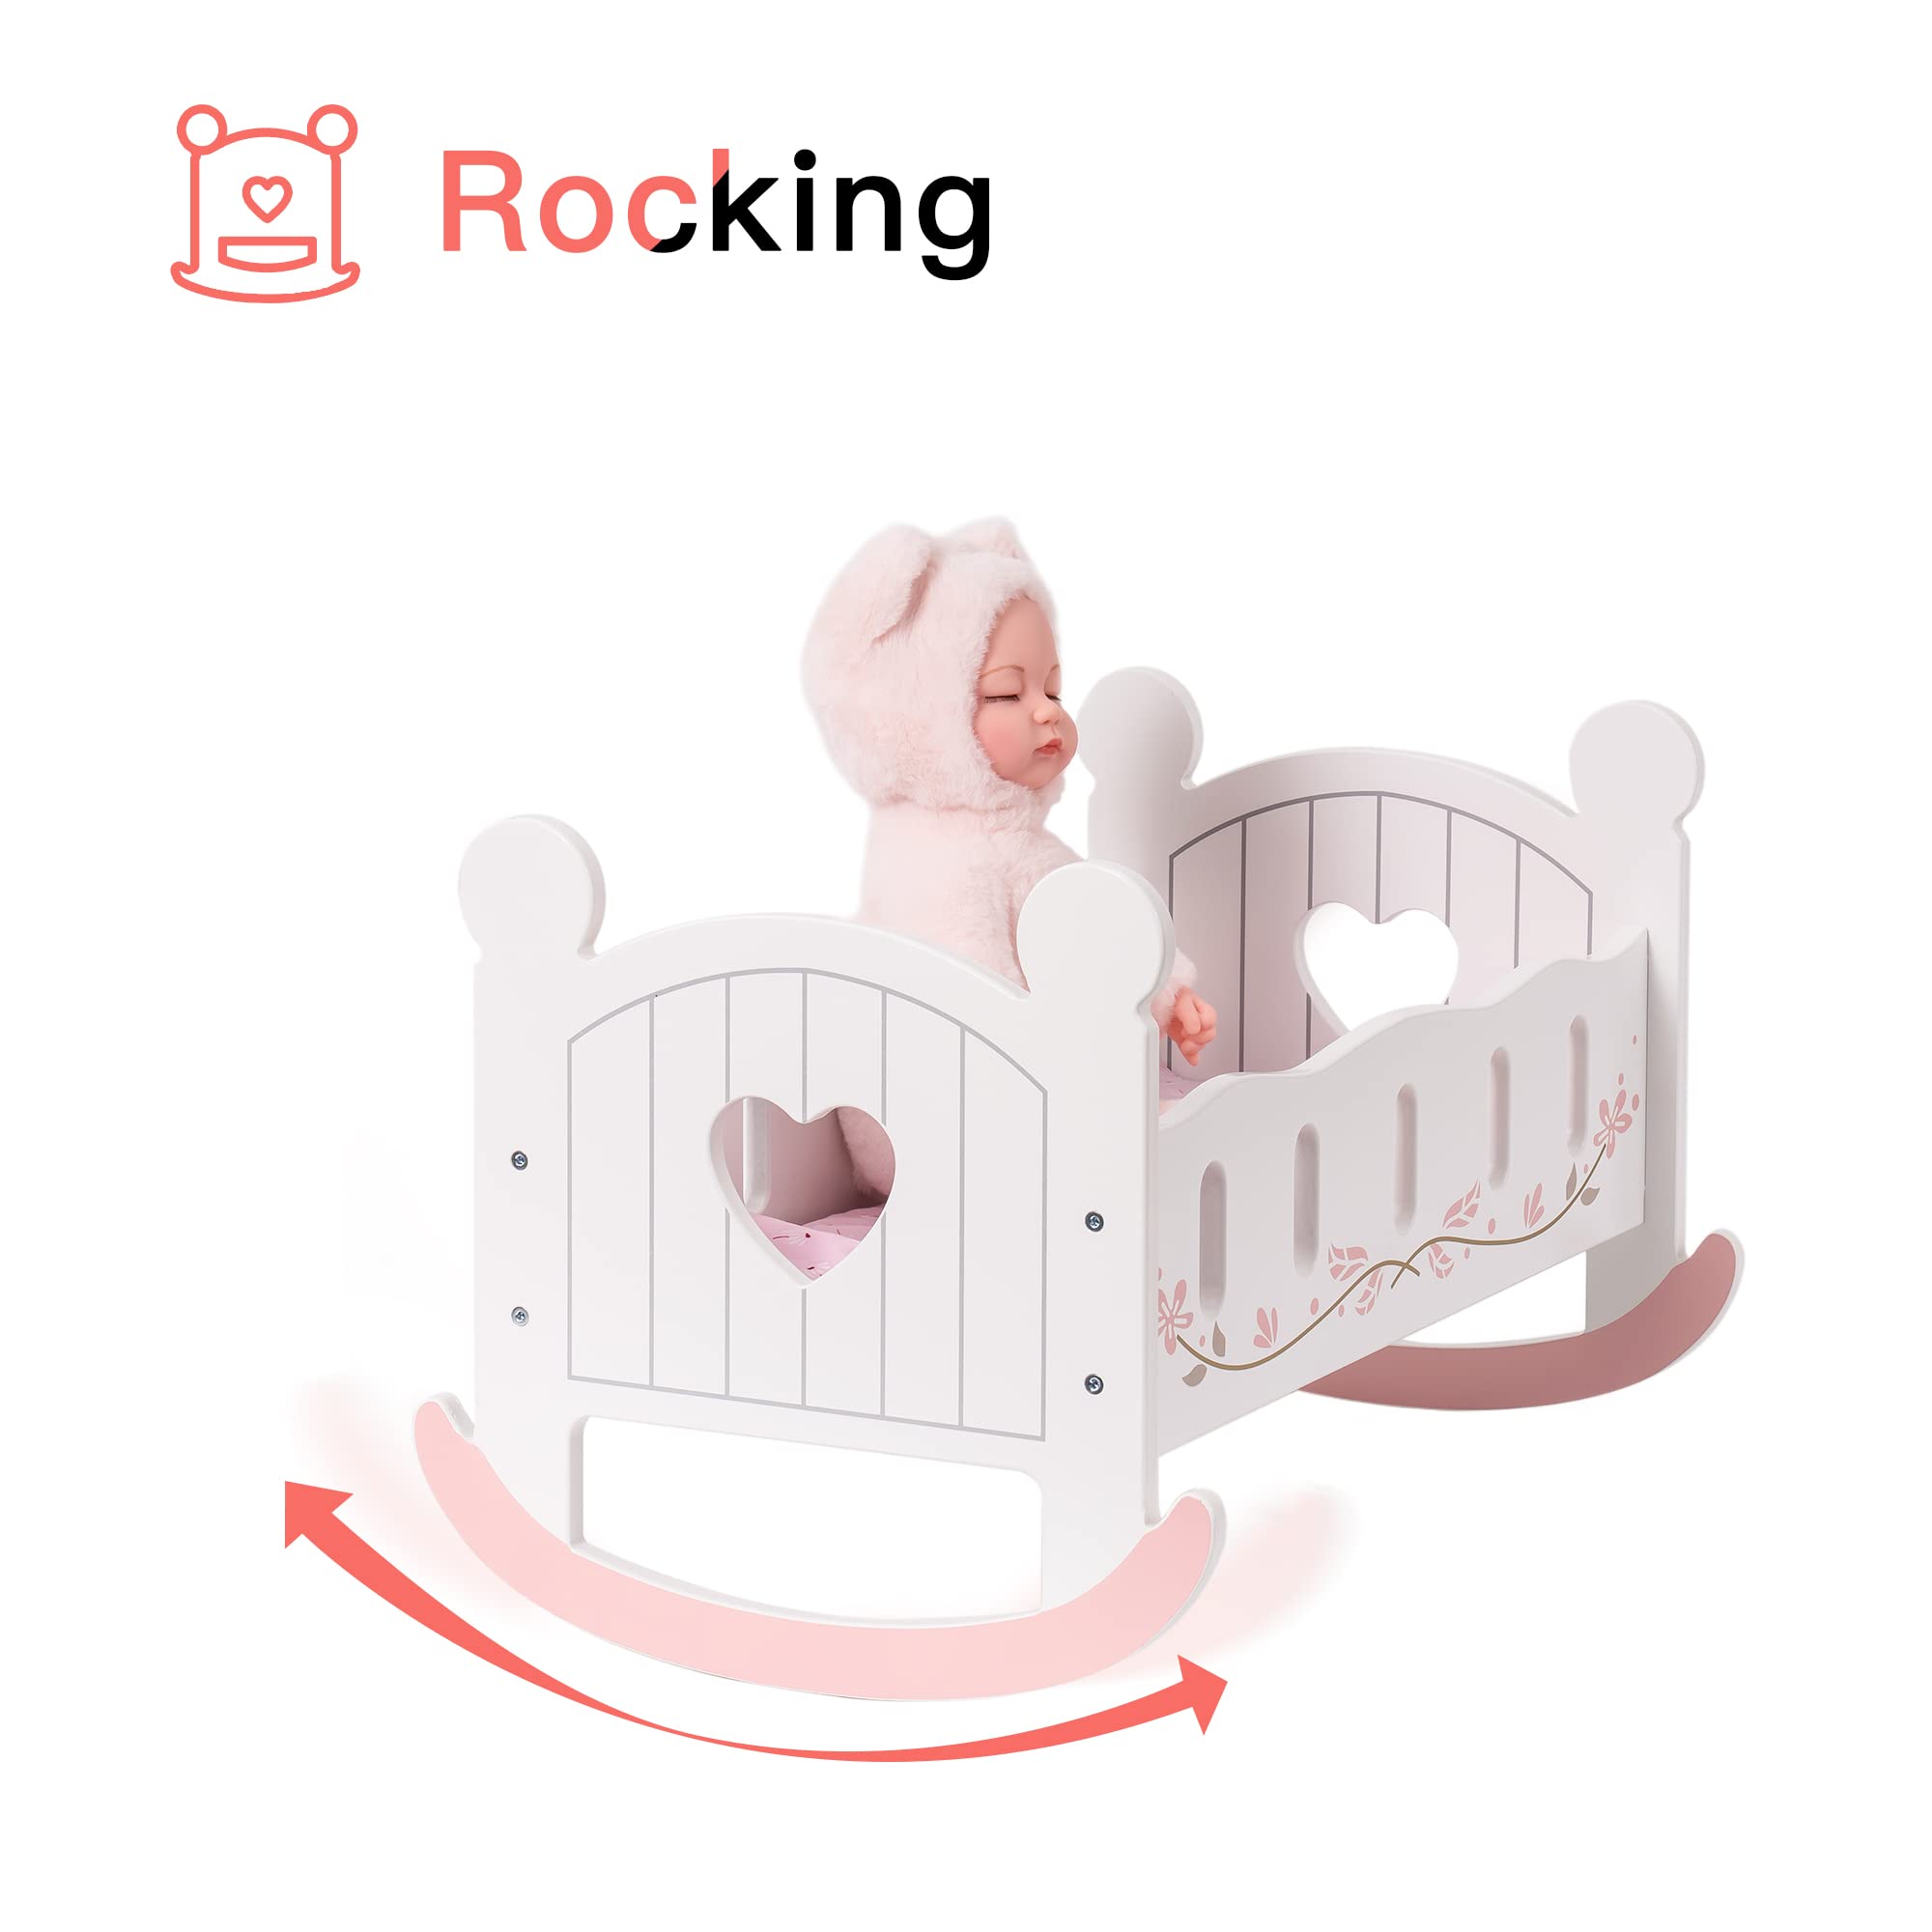 ROBOTIME Wooden Doll Cradle Rocking Baby Doll Crib, Reversible Doll Bed for Dolls Girl,Fits Dolls up to 18 Inches (White)